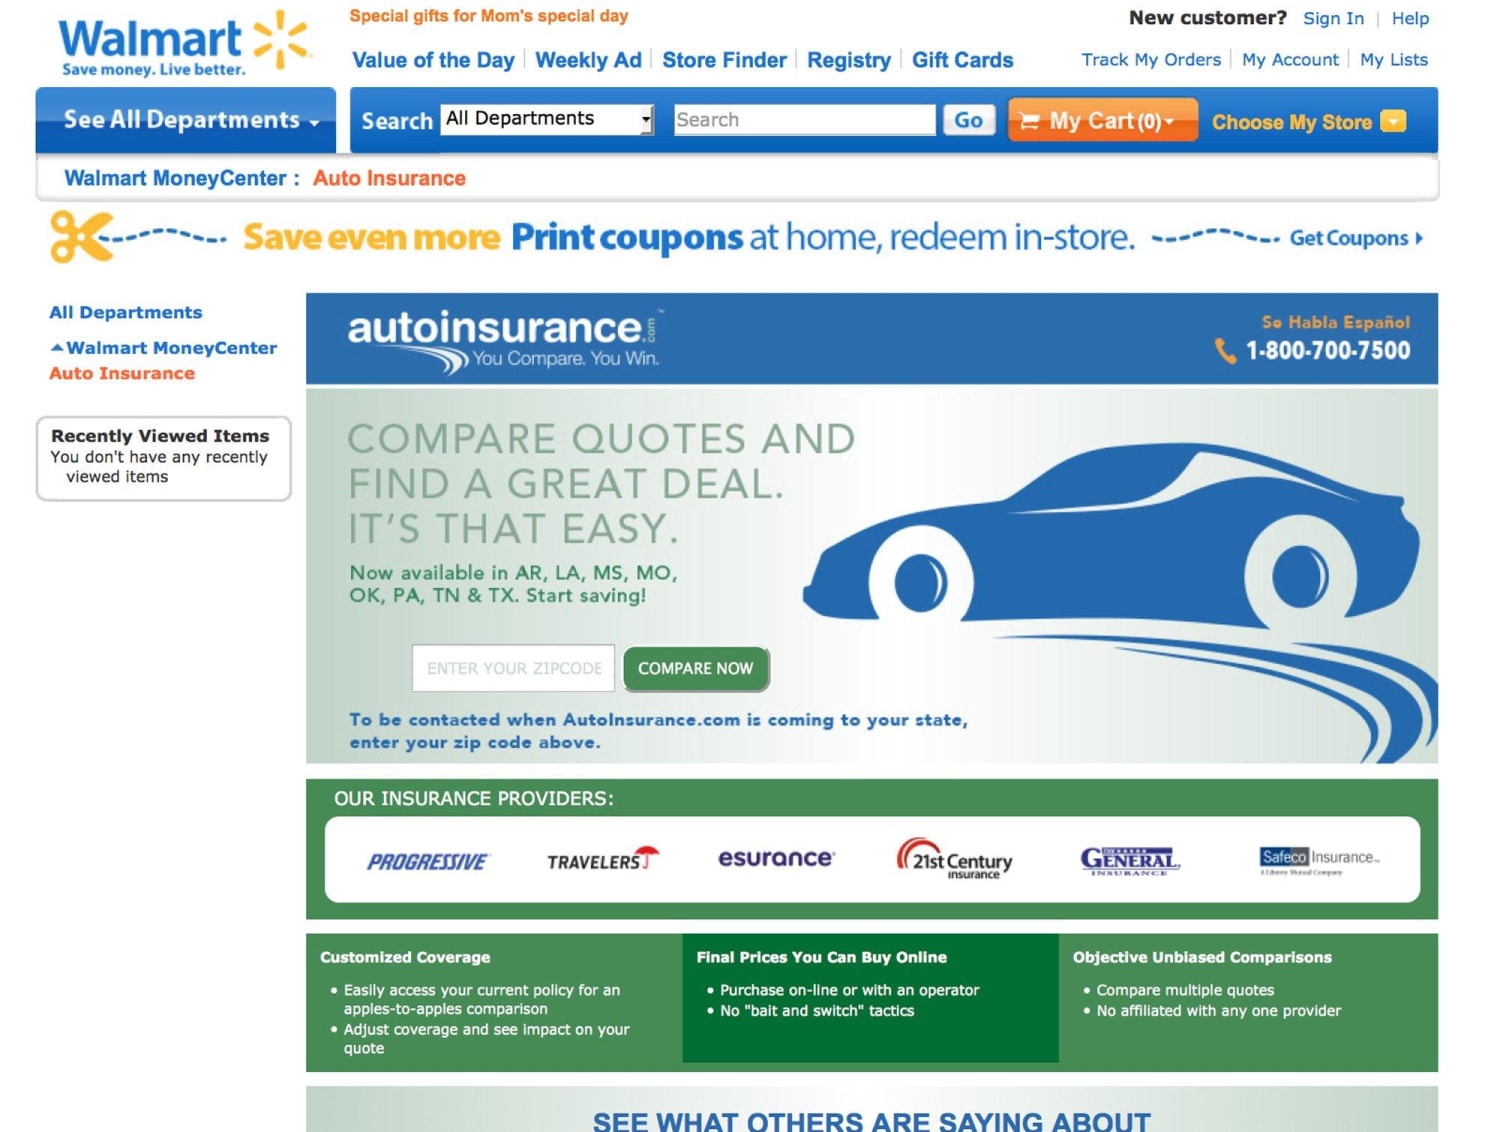 ... the world's largest retailer, is making a foray into auto insurance